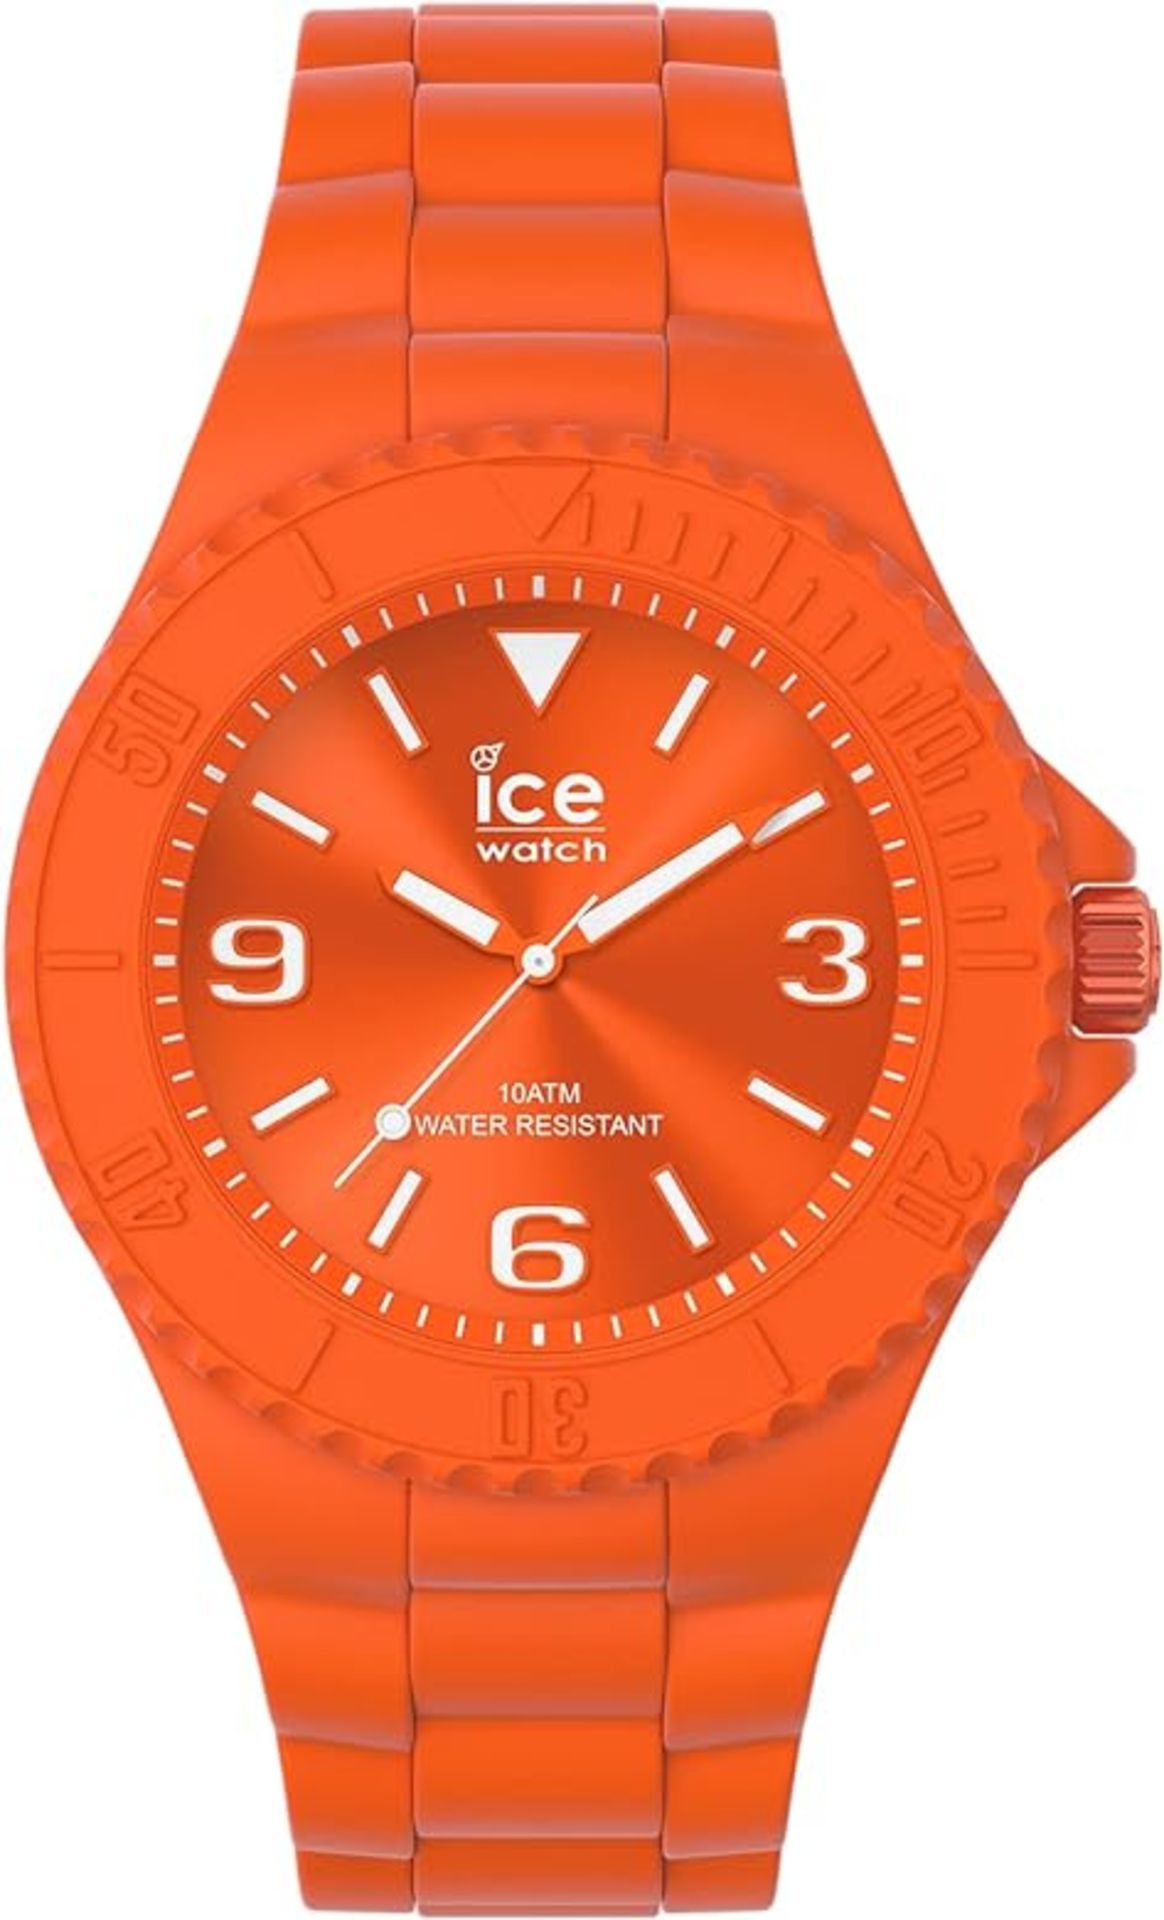 4x BRAND NEW ICE-WATCH Ice Generation Watch. ORANGE. RRP £60 EACH. (OFC873). Large (44 mm) men's